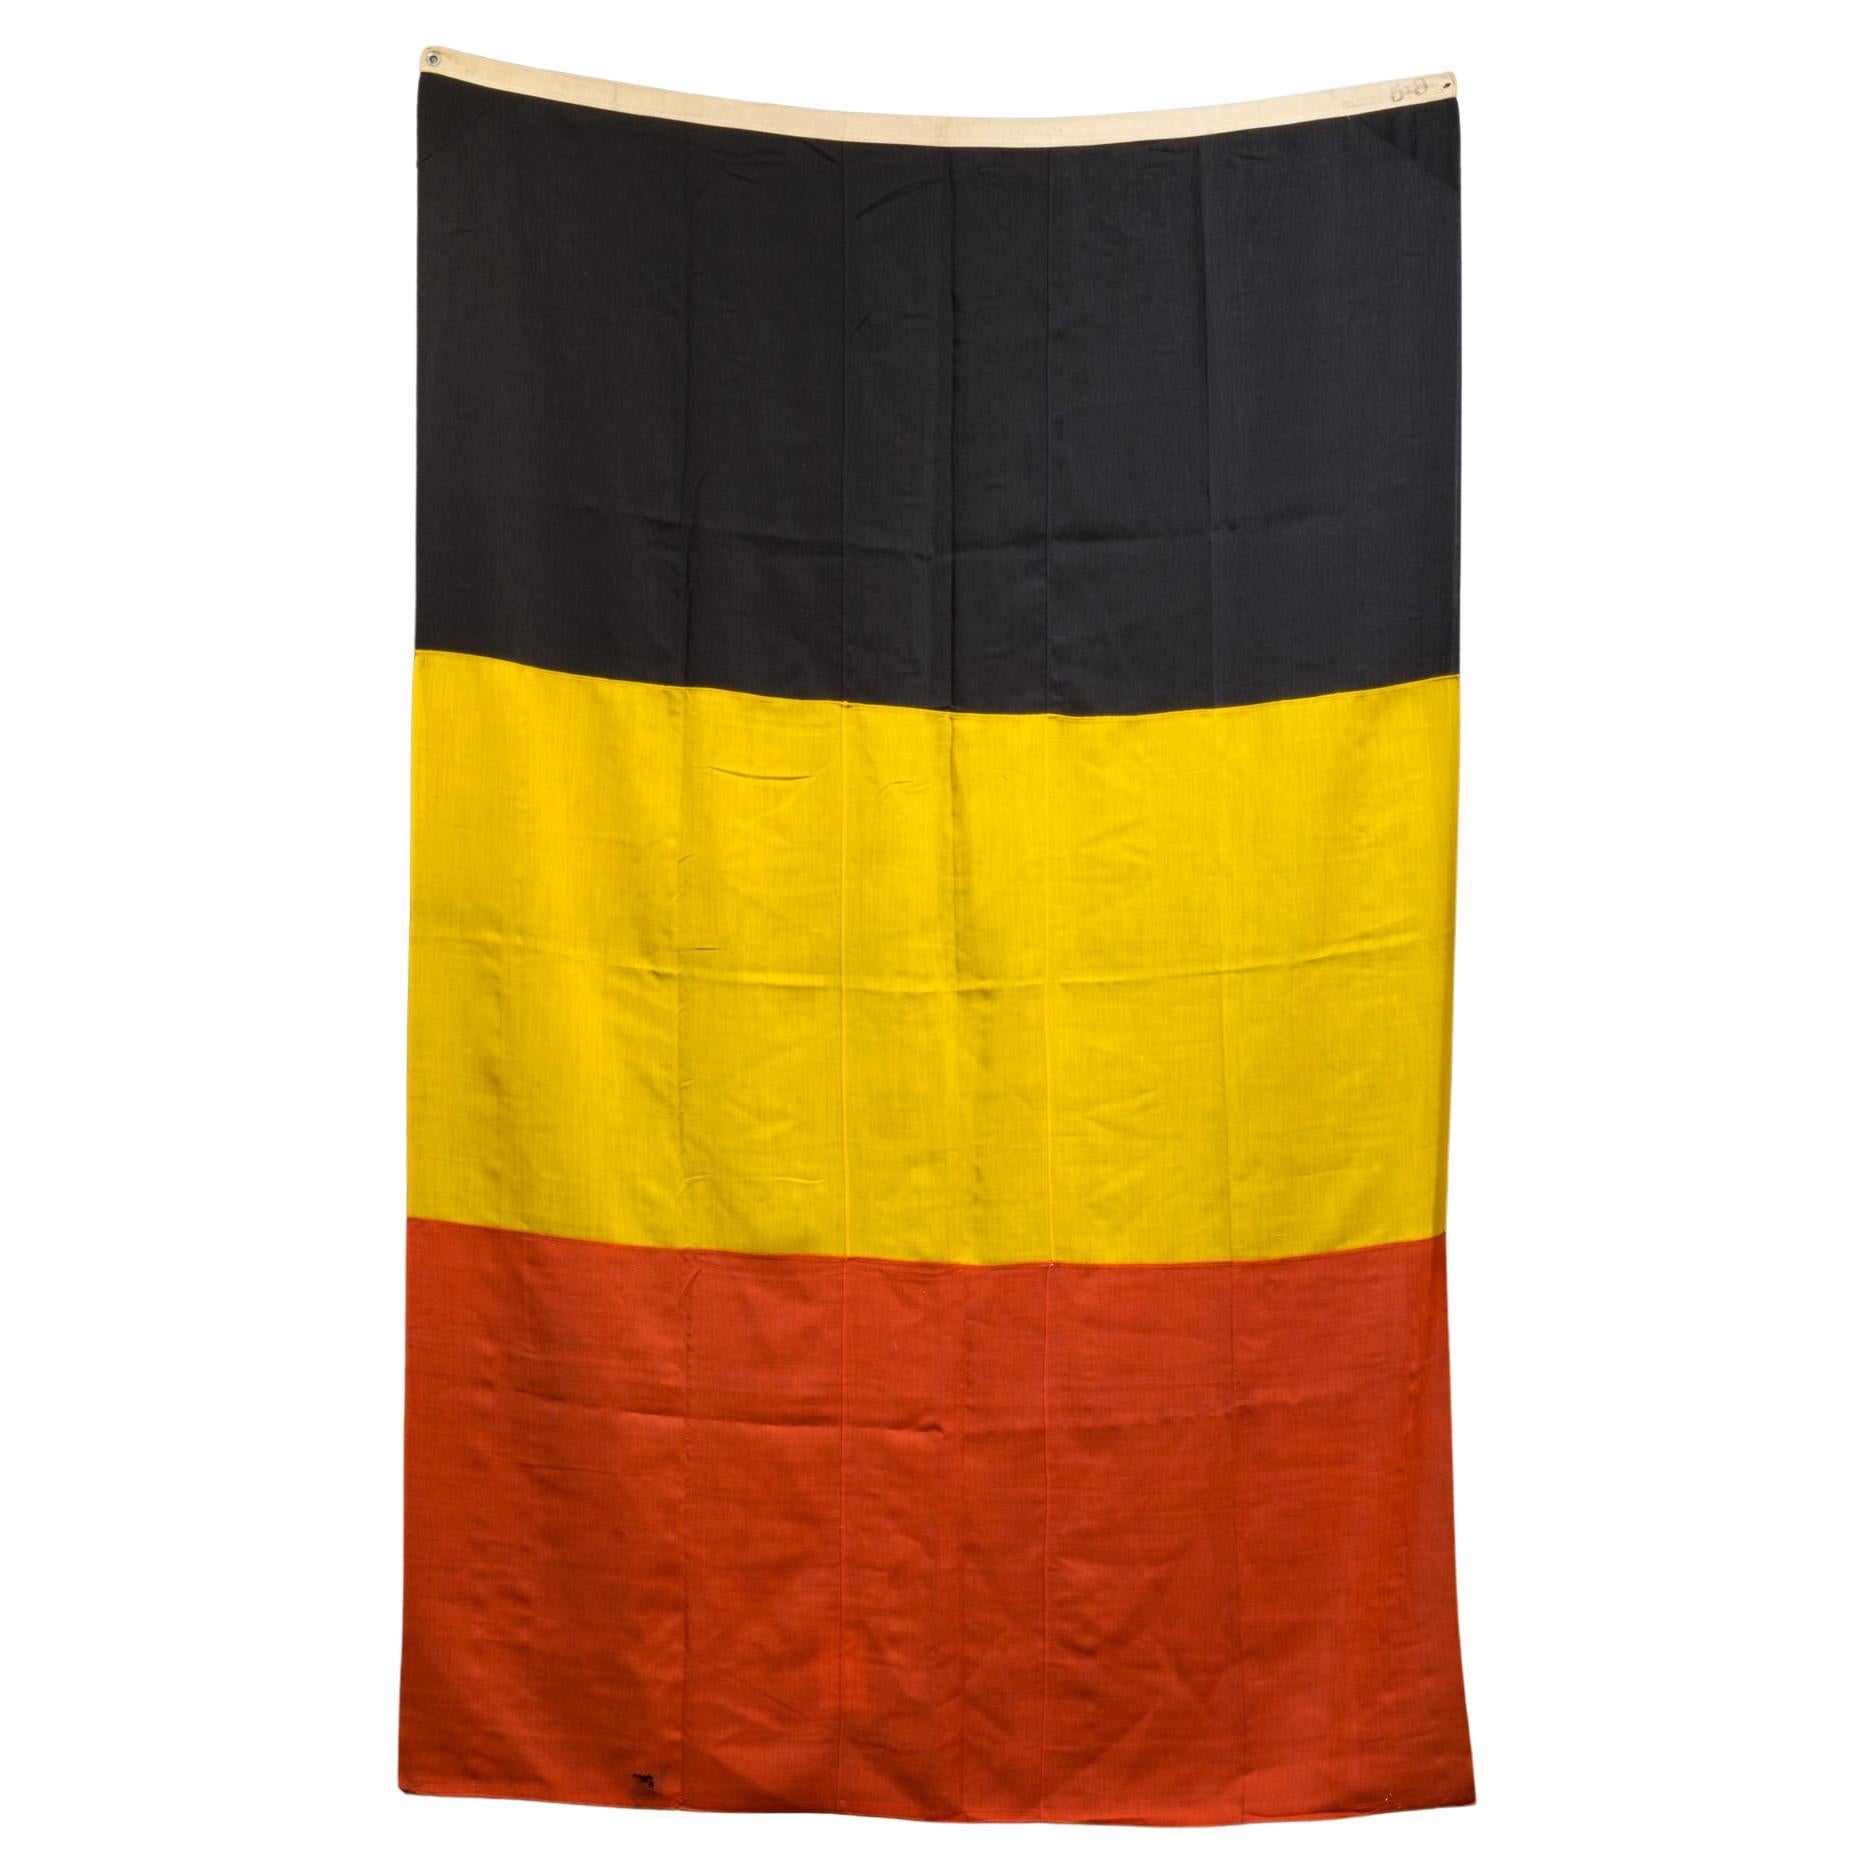 Anfang 20. Jh. Monumentale belgische Flagge ca. 1940-1950-FREE SHIPPING im Angebot